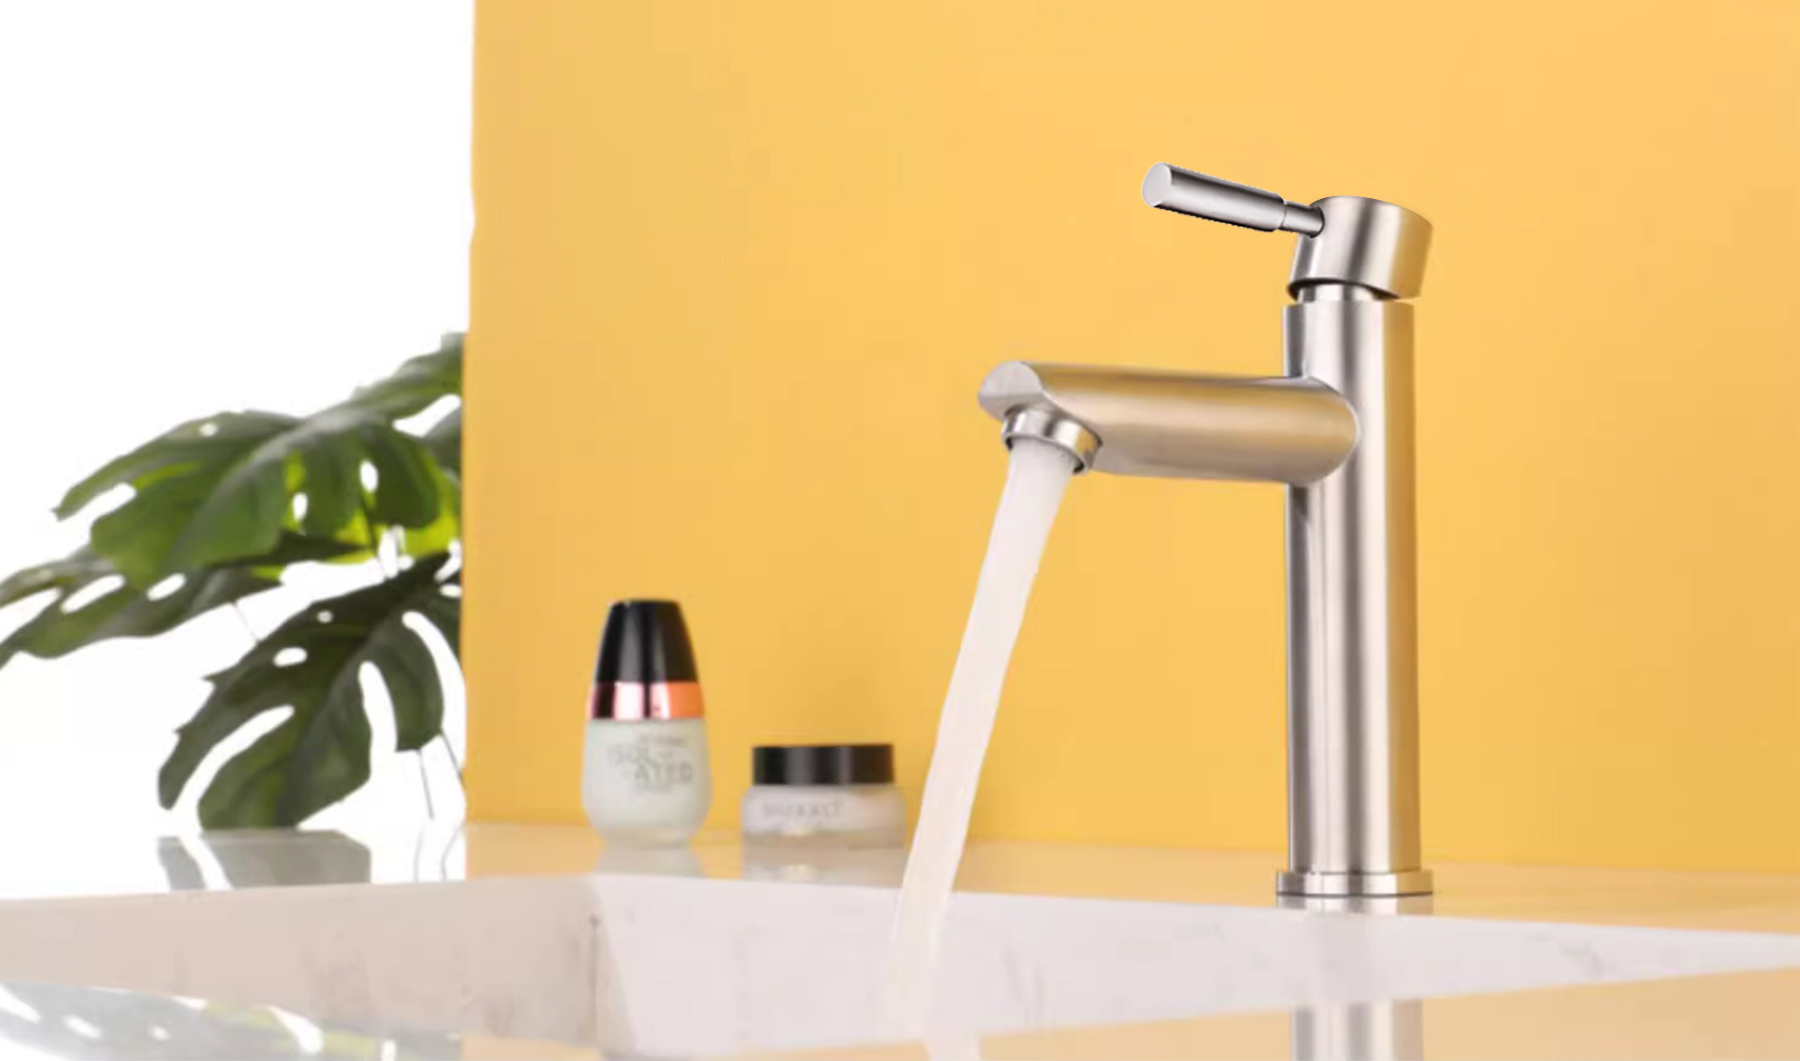 Stainless-Steel-Elevated-Basin-Faucet1